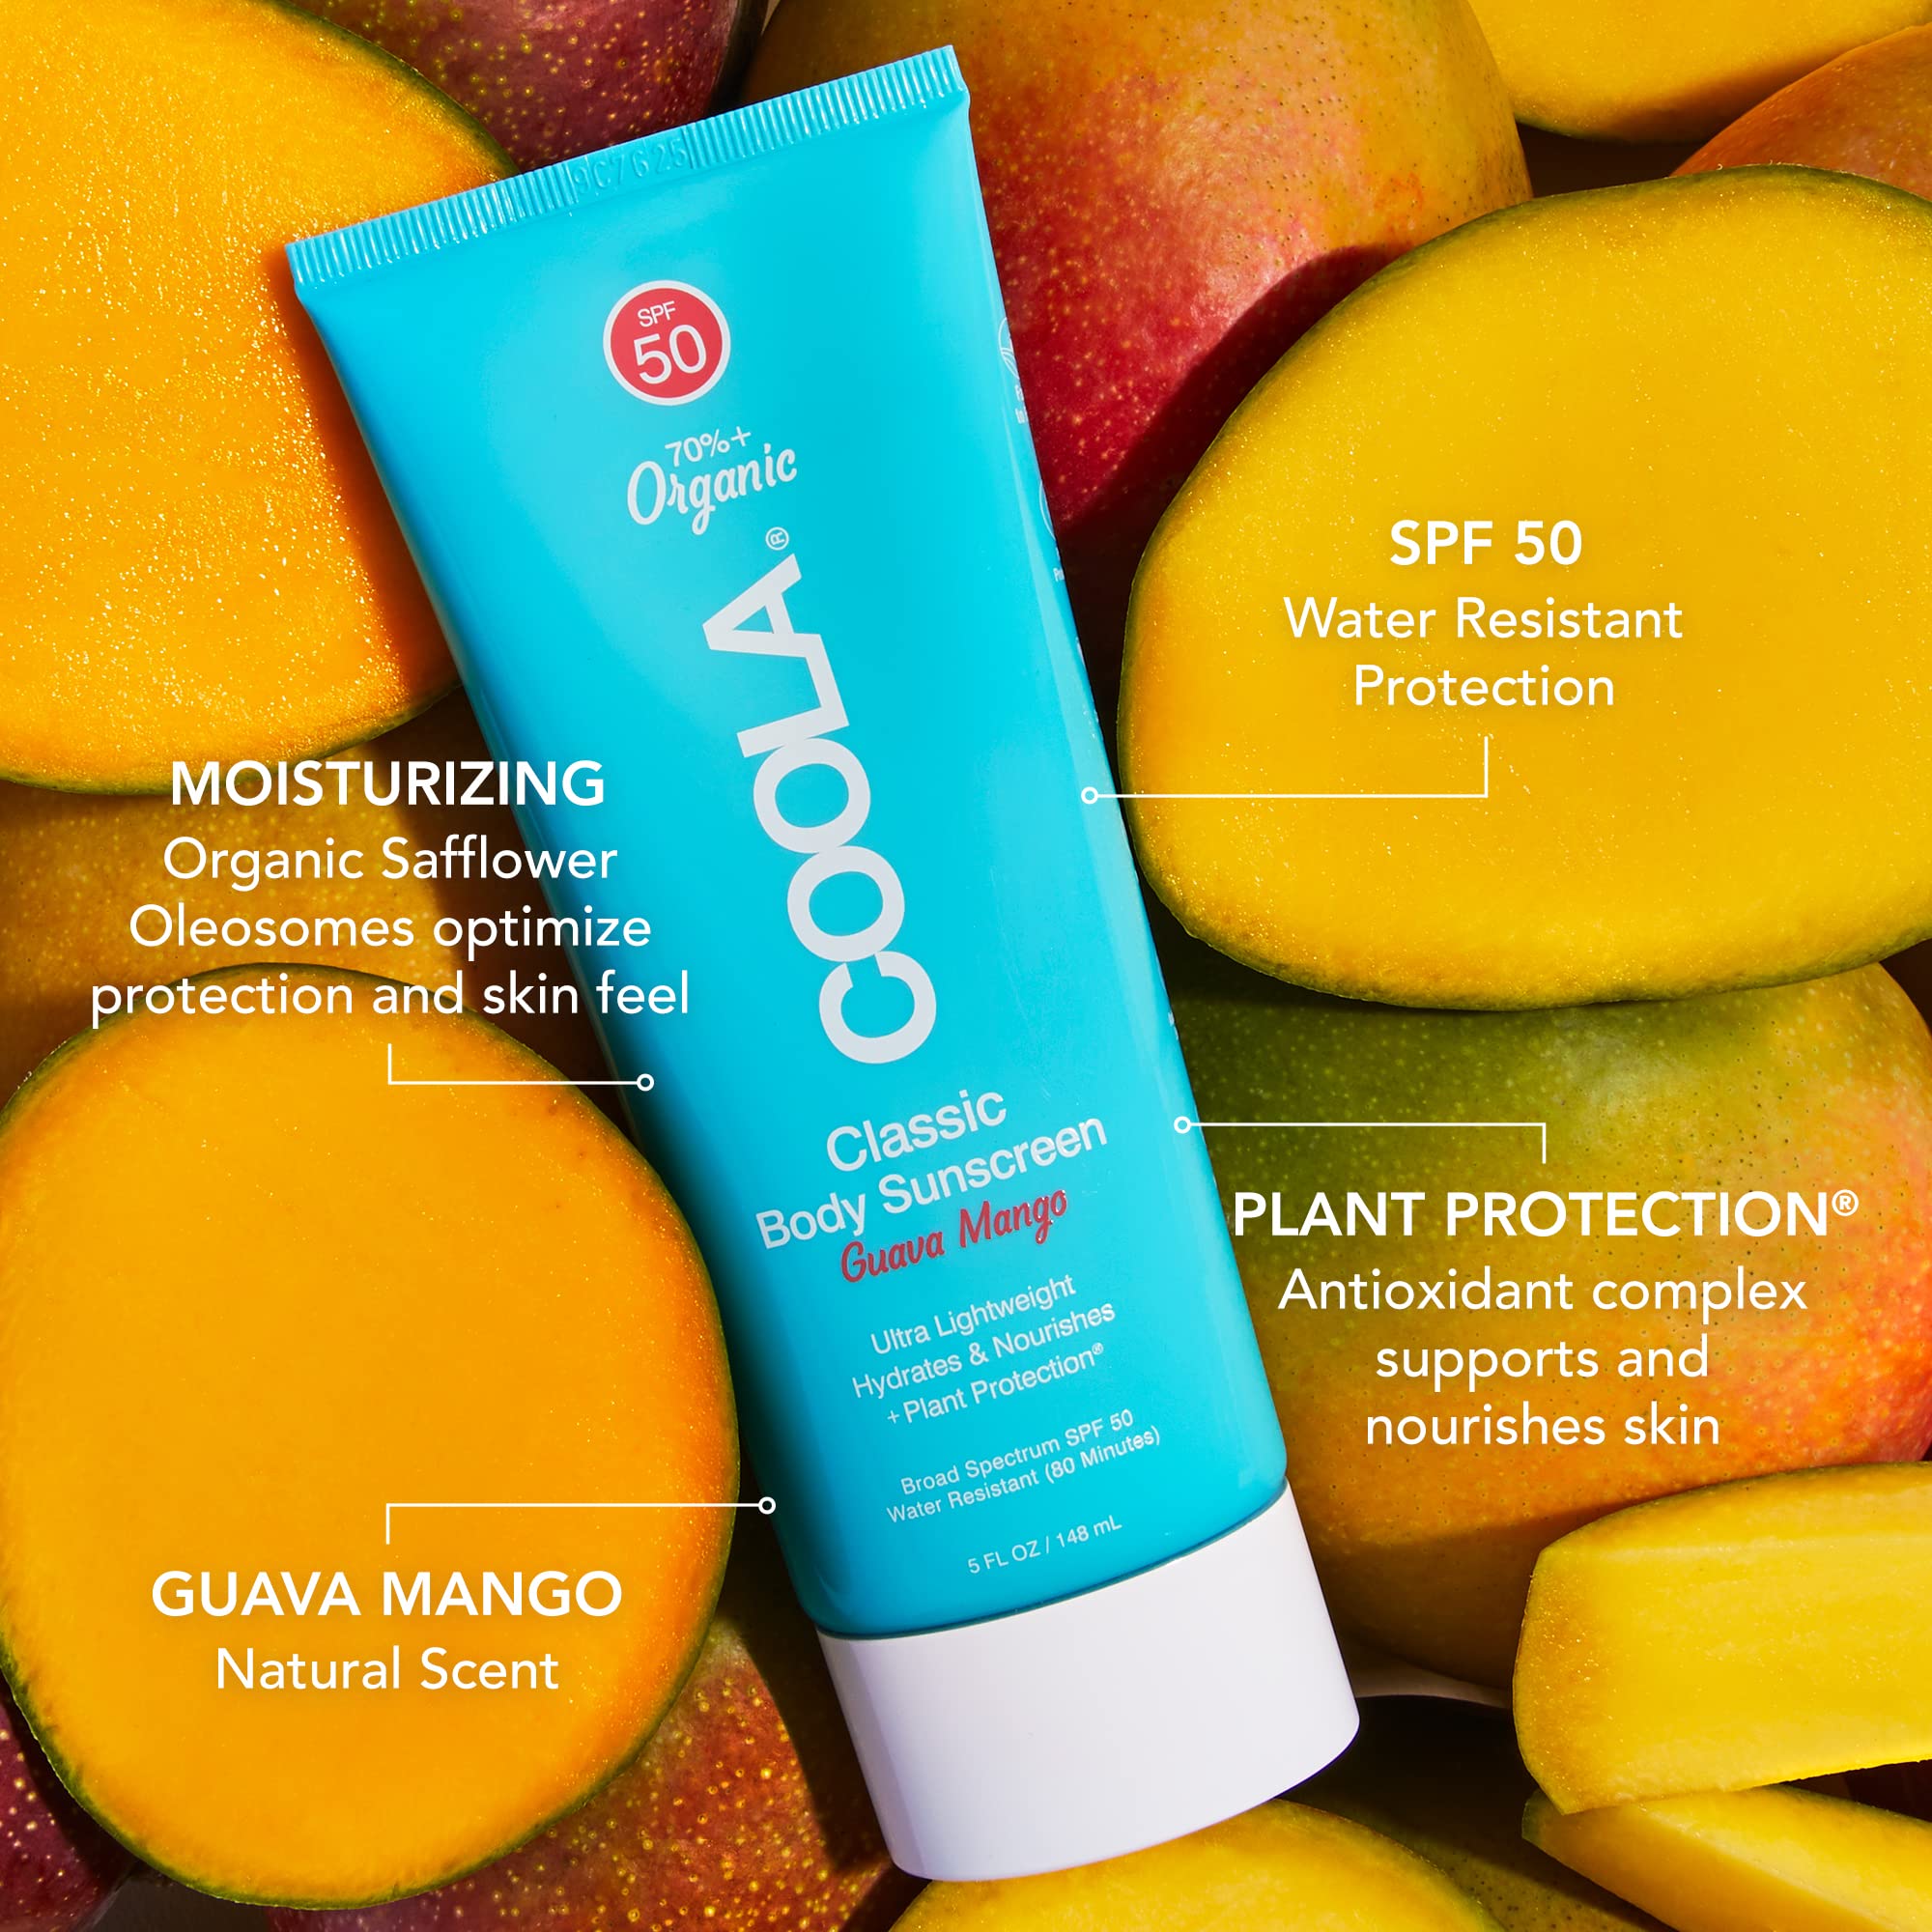 COOLA Organic Sunscreen SPF 50 Sunblock Body Lotion, Dermatologist Tested Skin Care for Daily Protection, Vegan and Gluten Free,